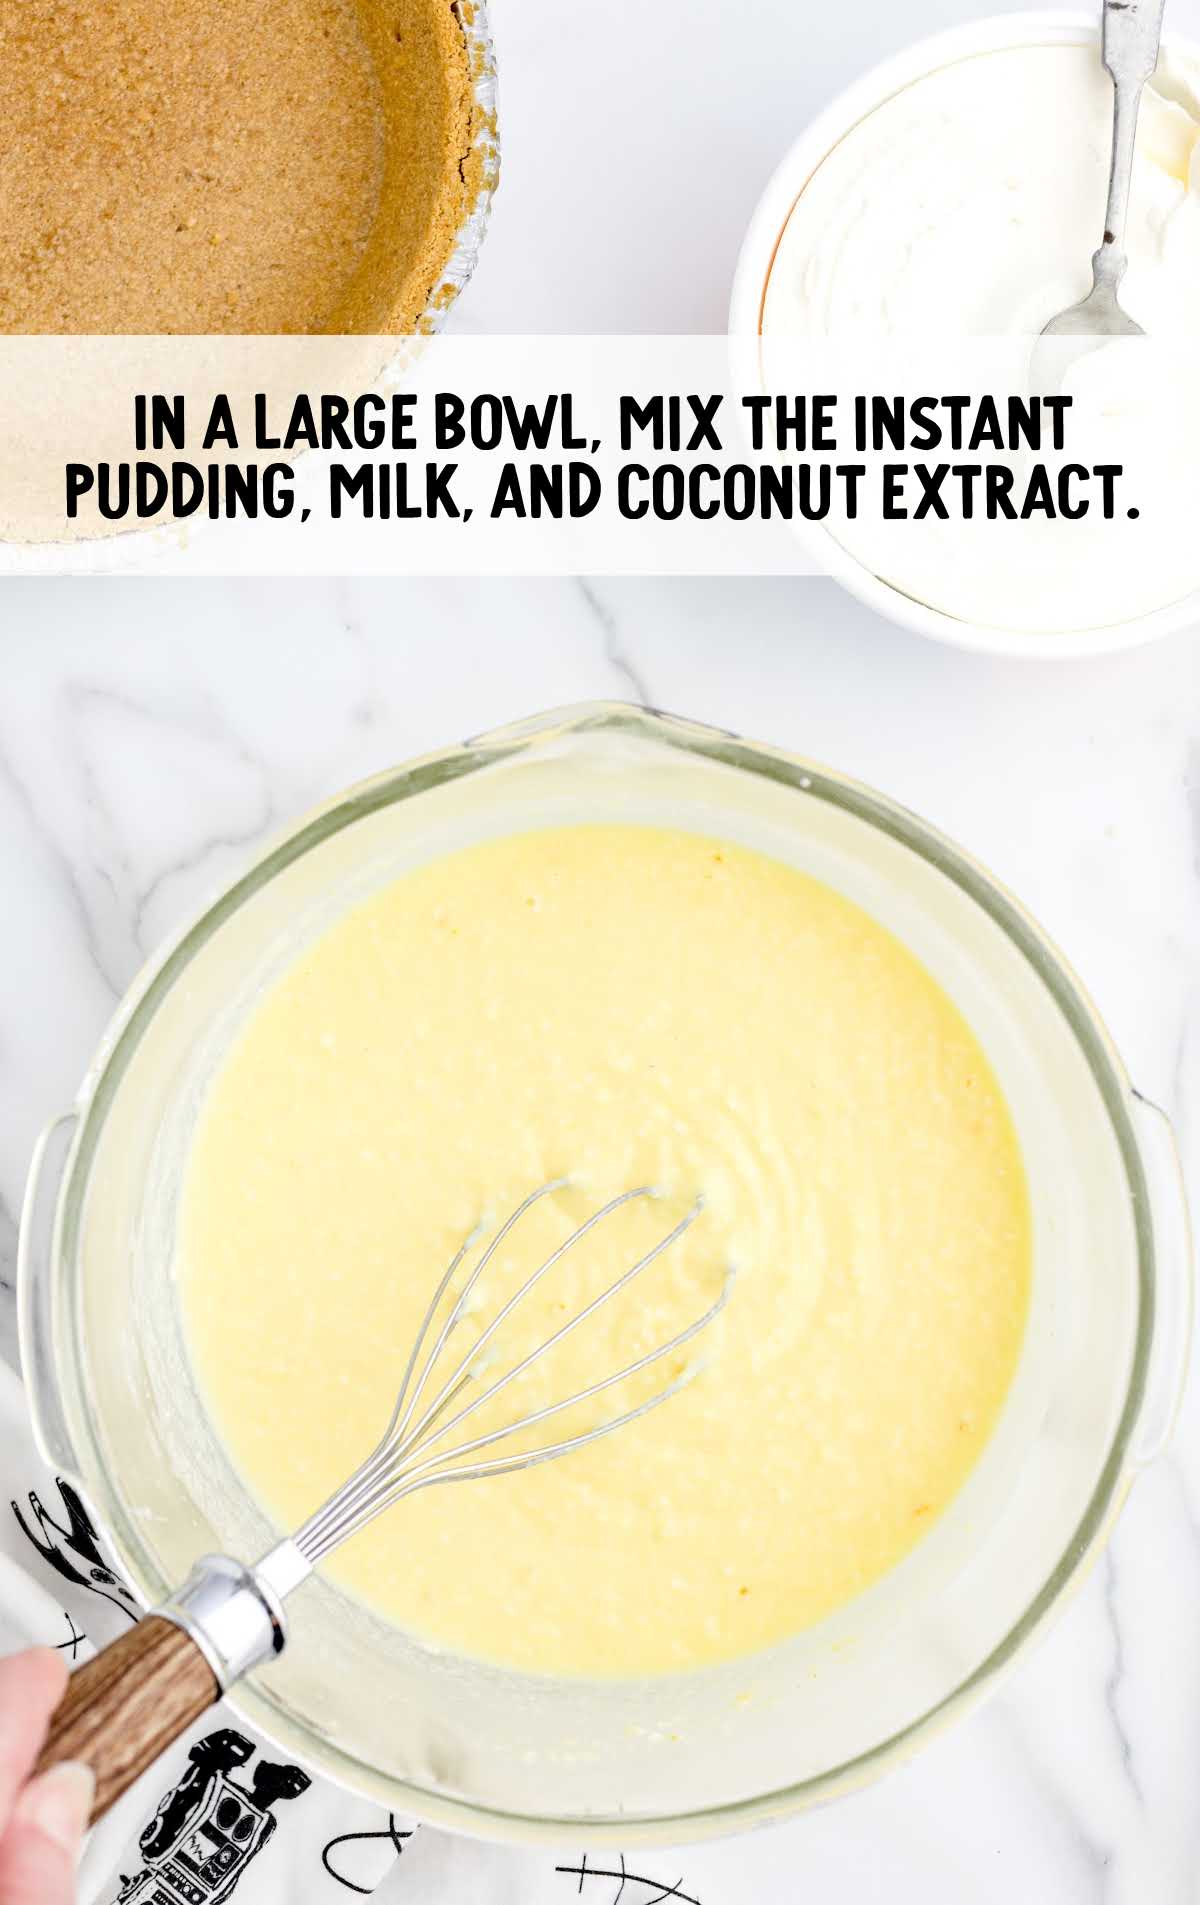 pudding, milk, and coconut extract whisked in a bowl